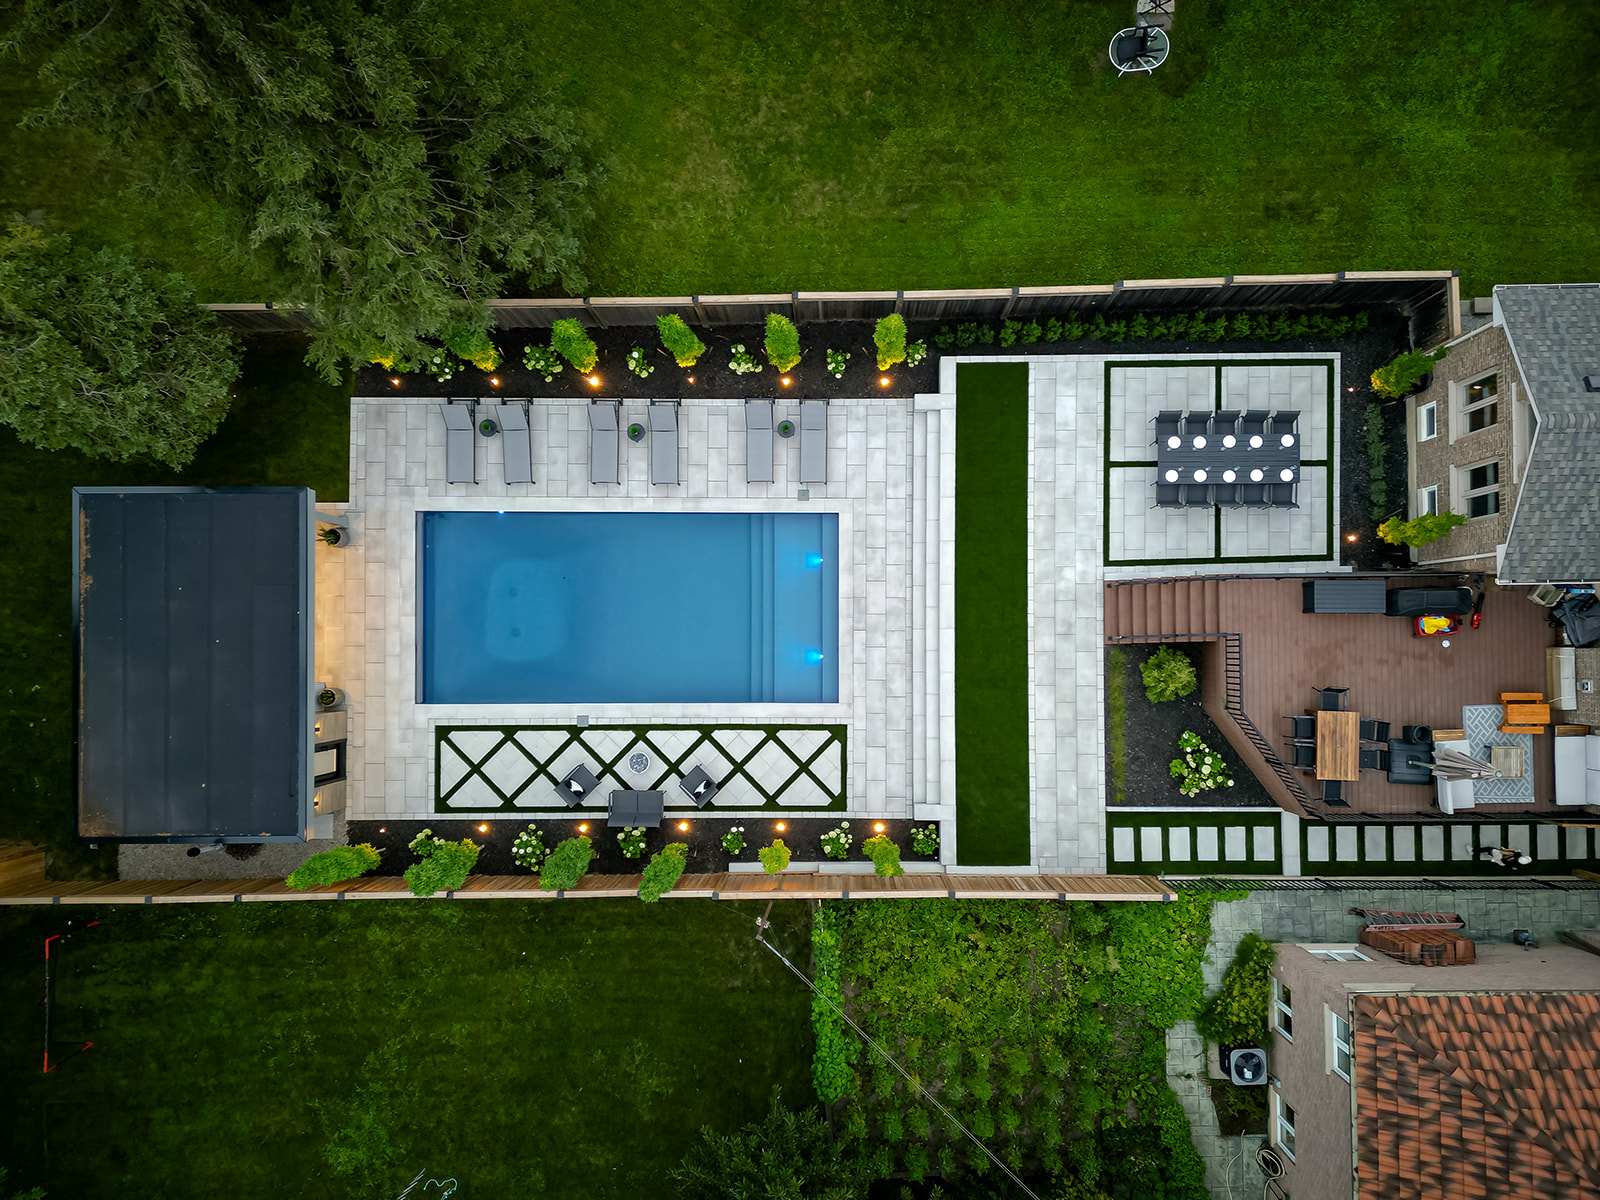 Top-down view of an inground pool, lounge chairs, a pool house and a deck beside the house.